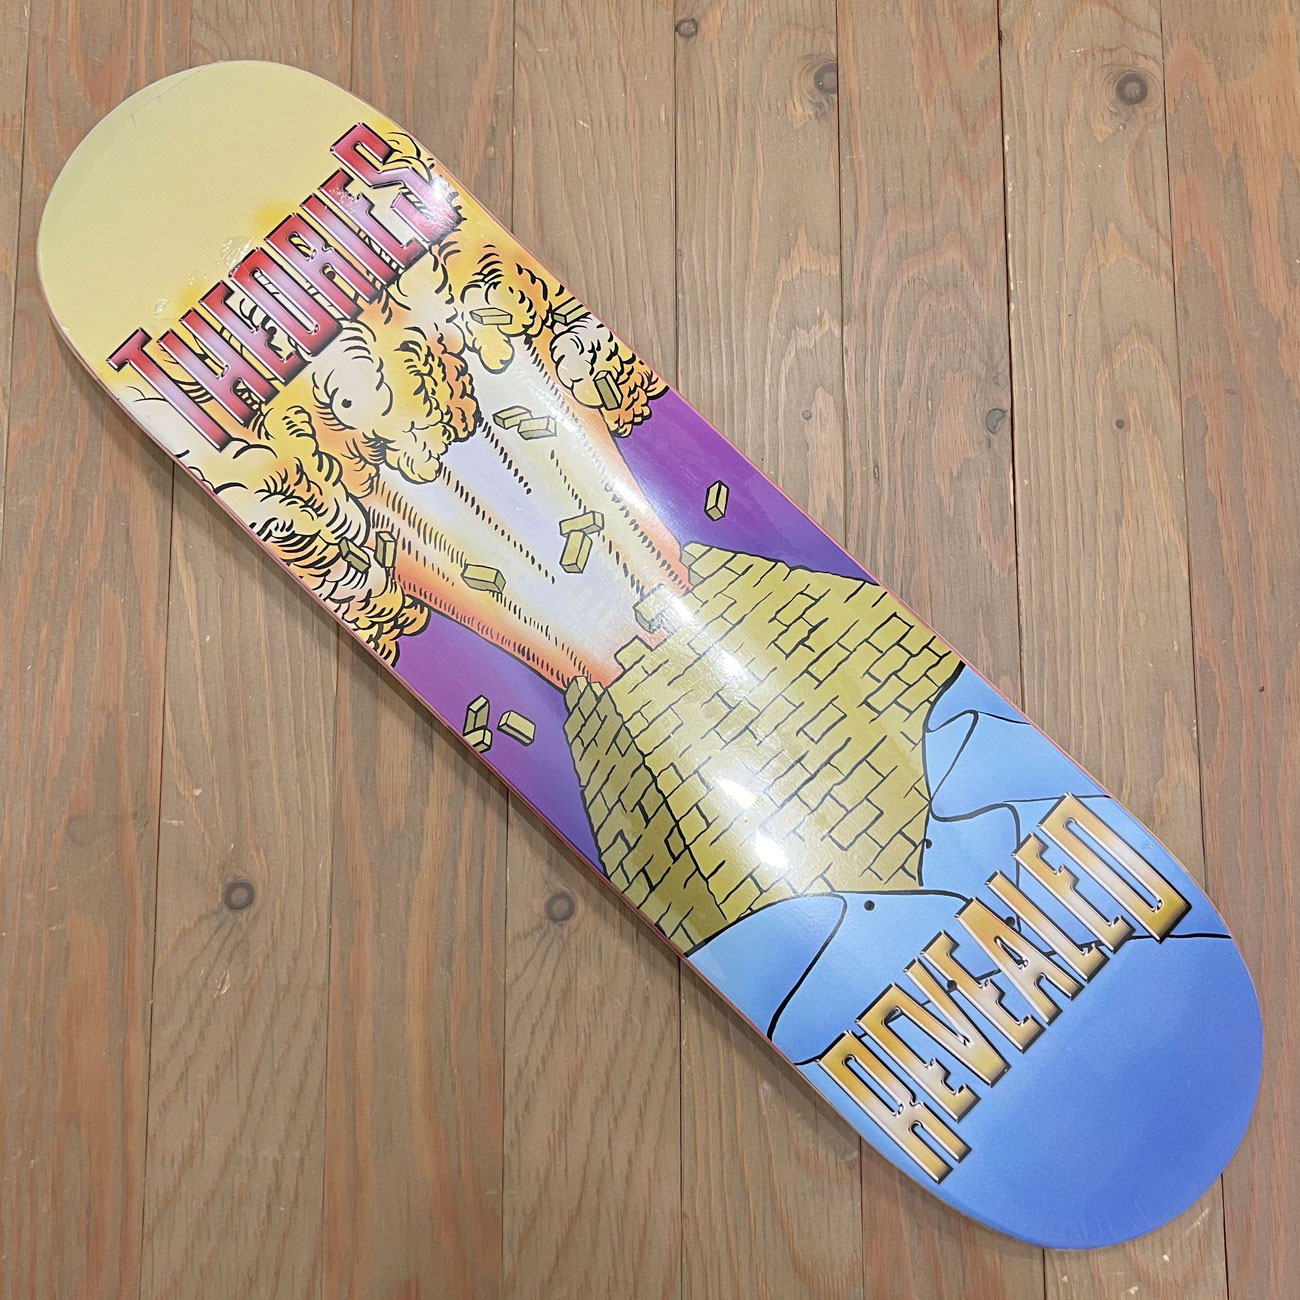 【POP UP】 THEORIES REVEALED DECK 8.0inch